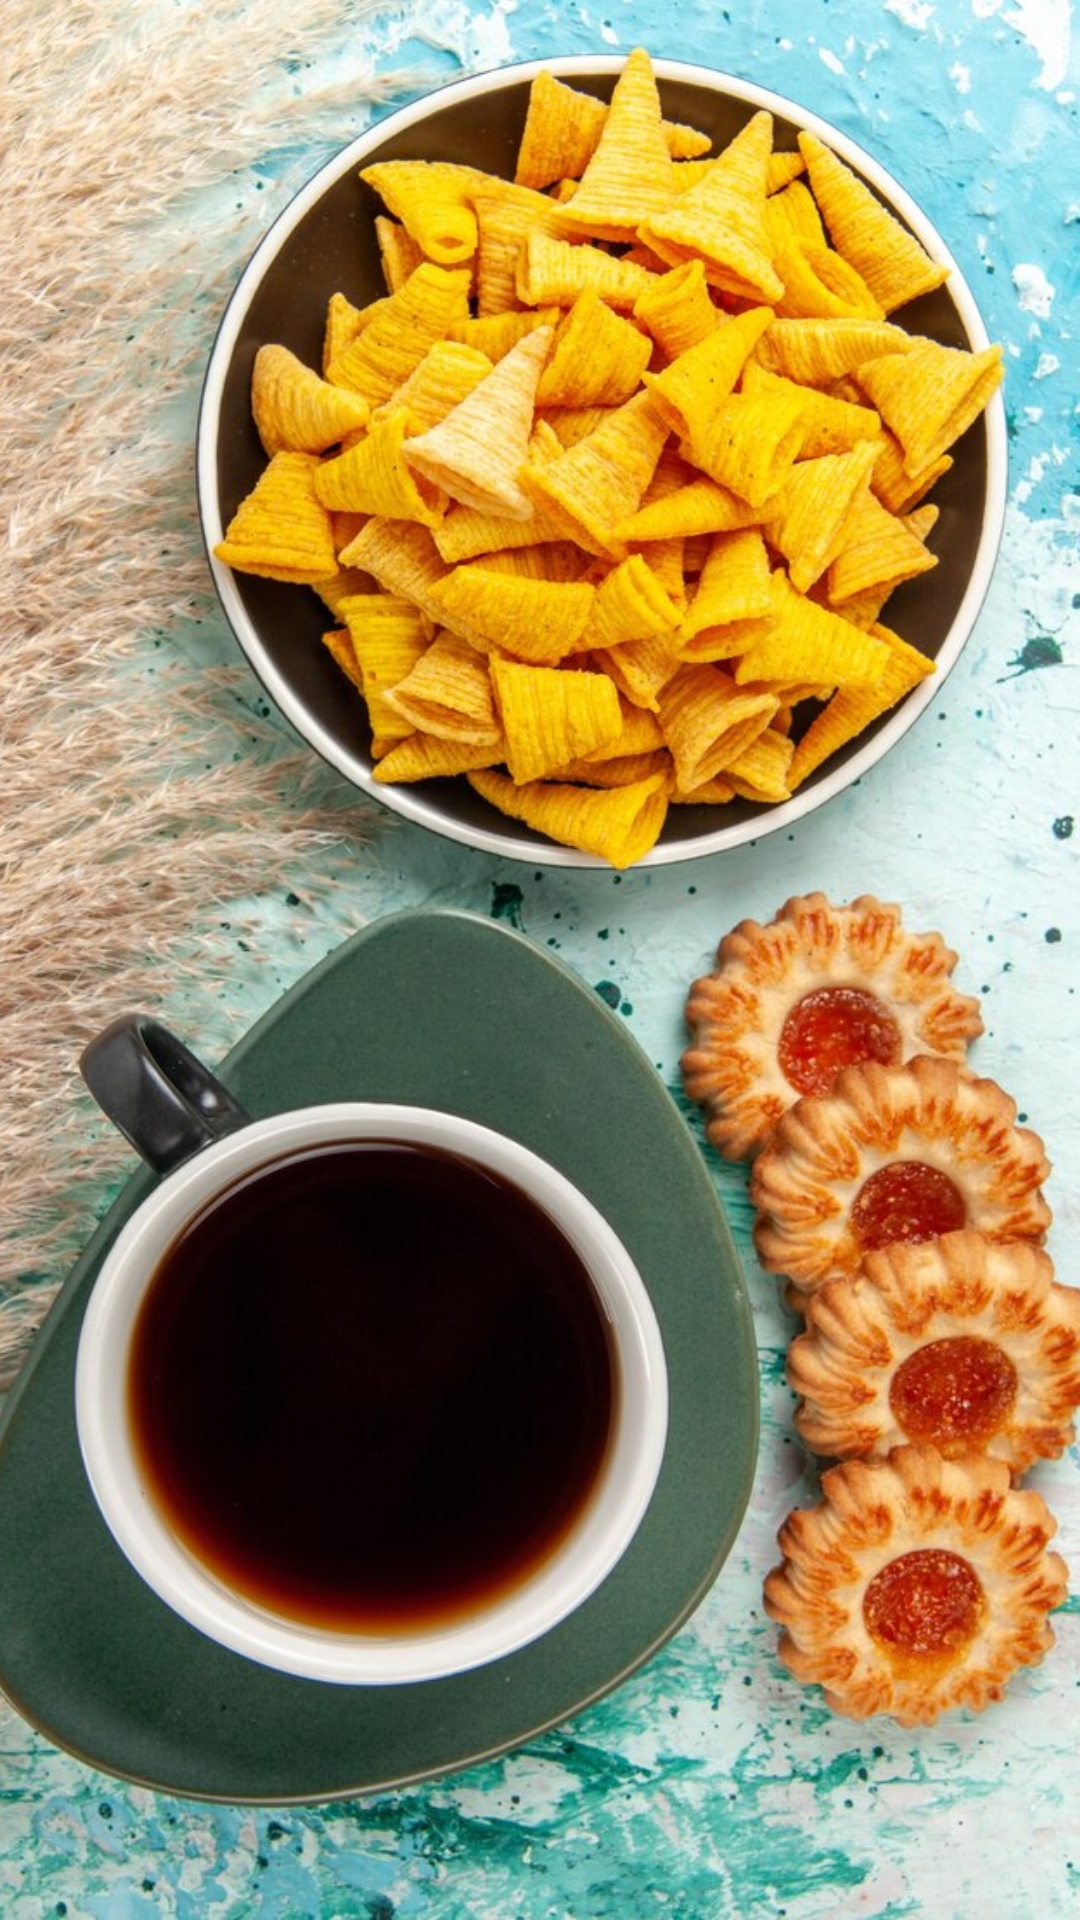 Healthy and tasty non-fried snacks to pair with your evening chai 